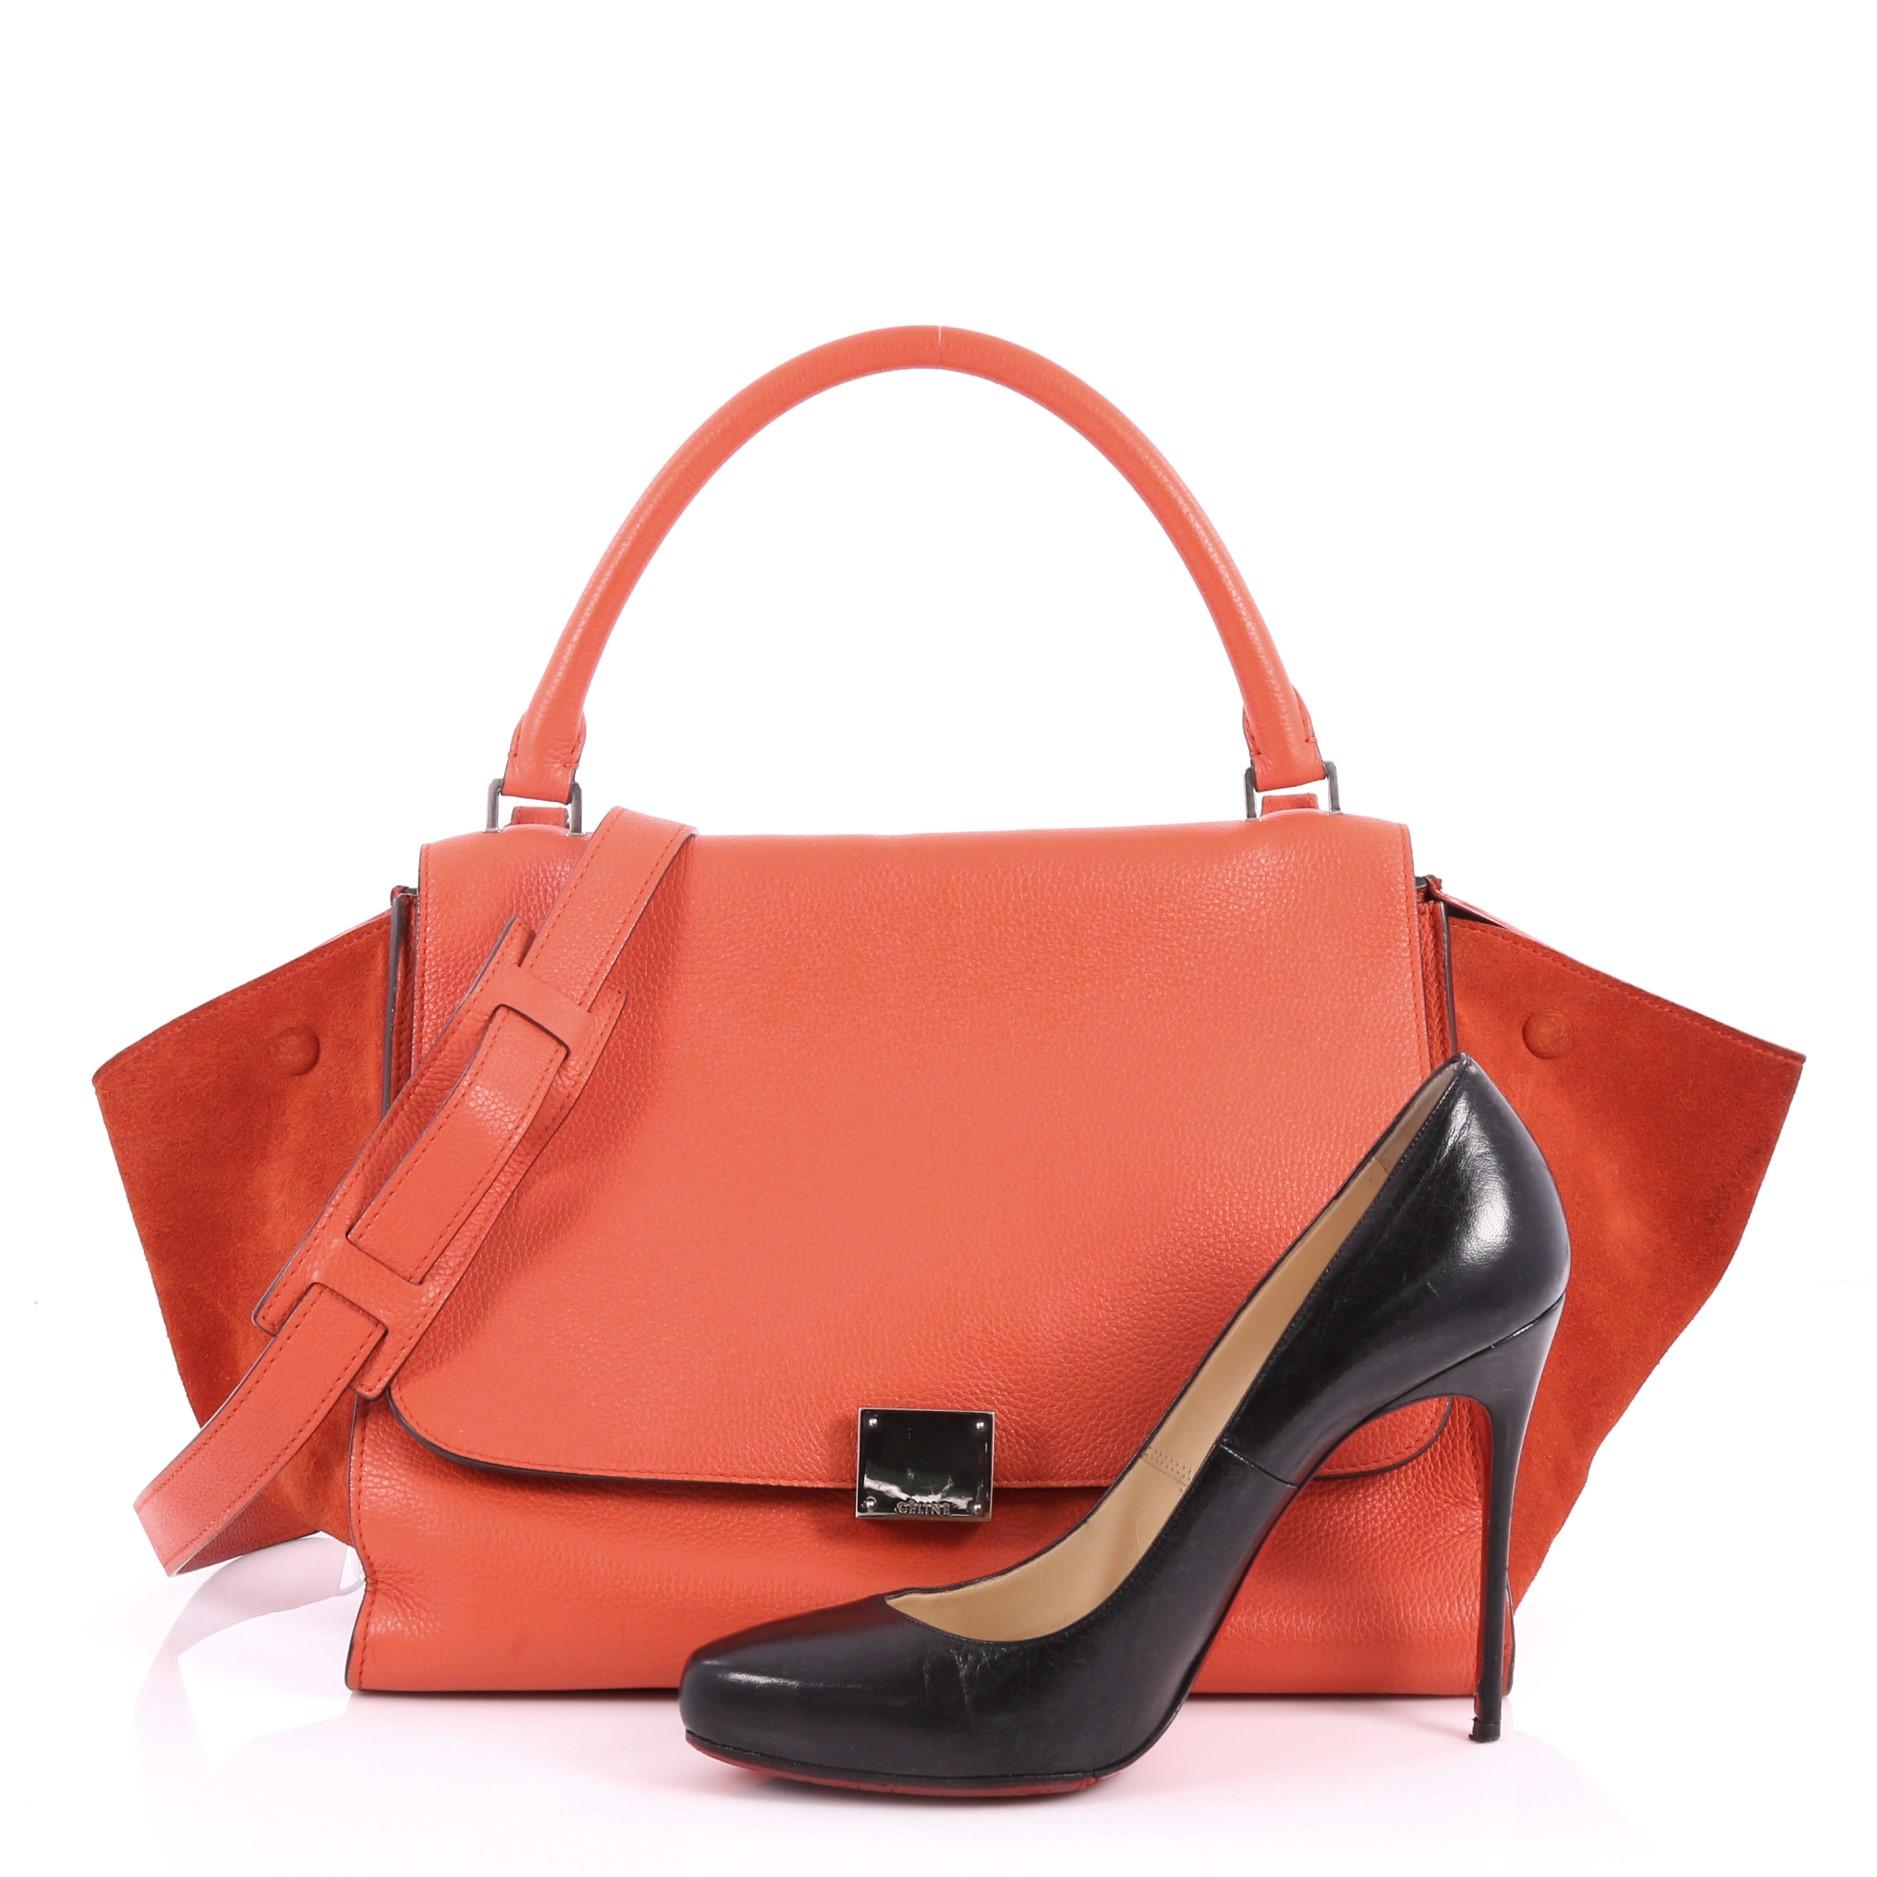 This authentic Celine Trapeze Handbag Leather Medium is a modern minimalist design with a playful twist in an array of subdued colors. Crafted from orange leather with orange suede wings, this popular bag features exterior back zip pocket, side snap